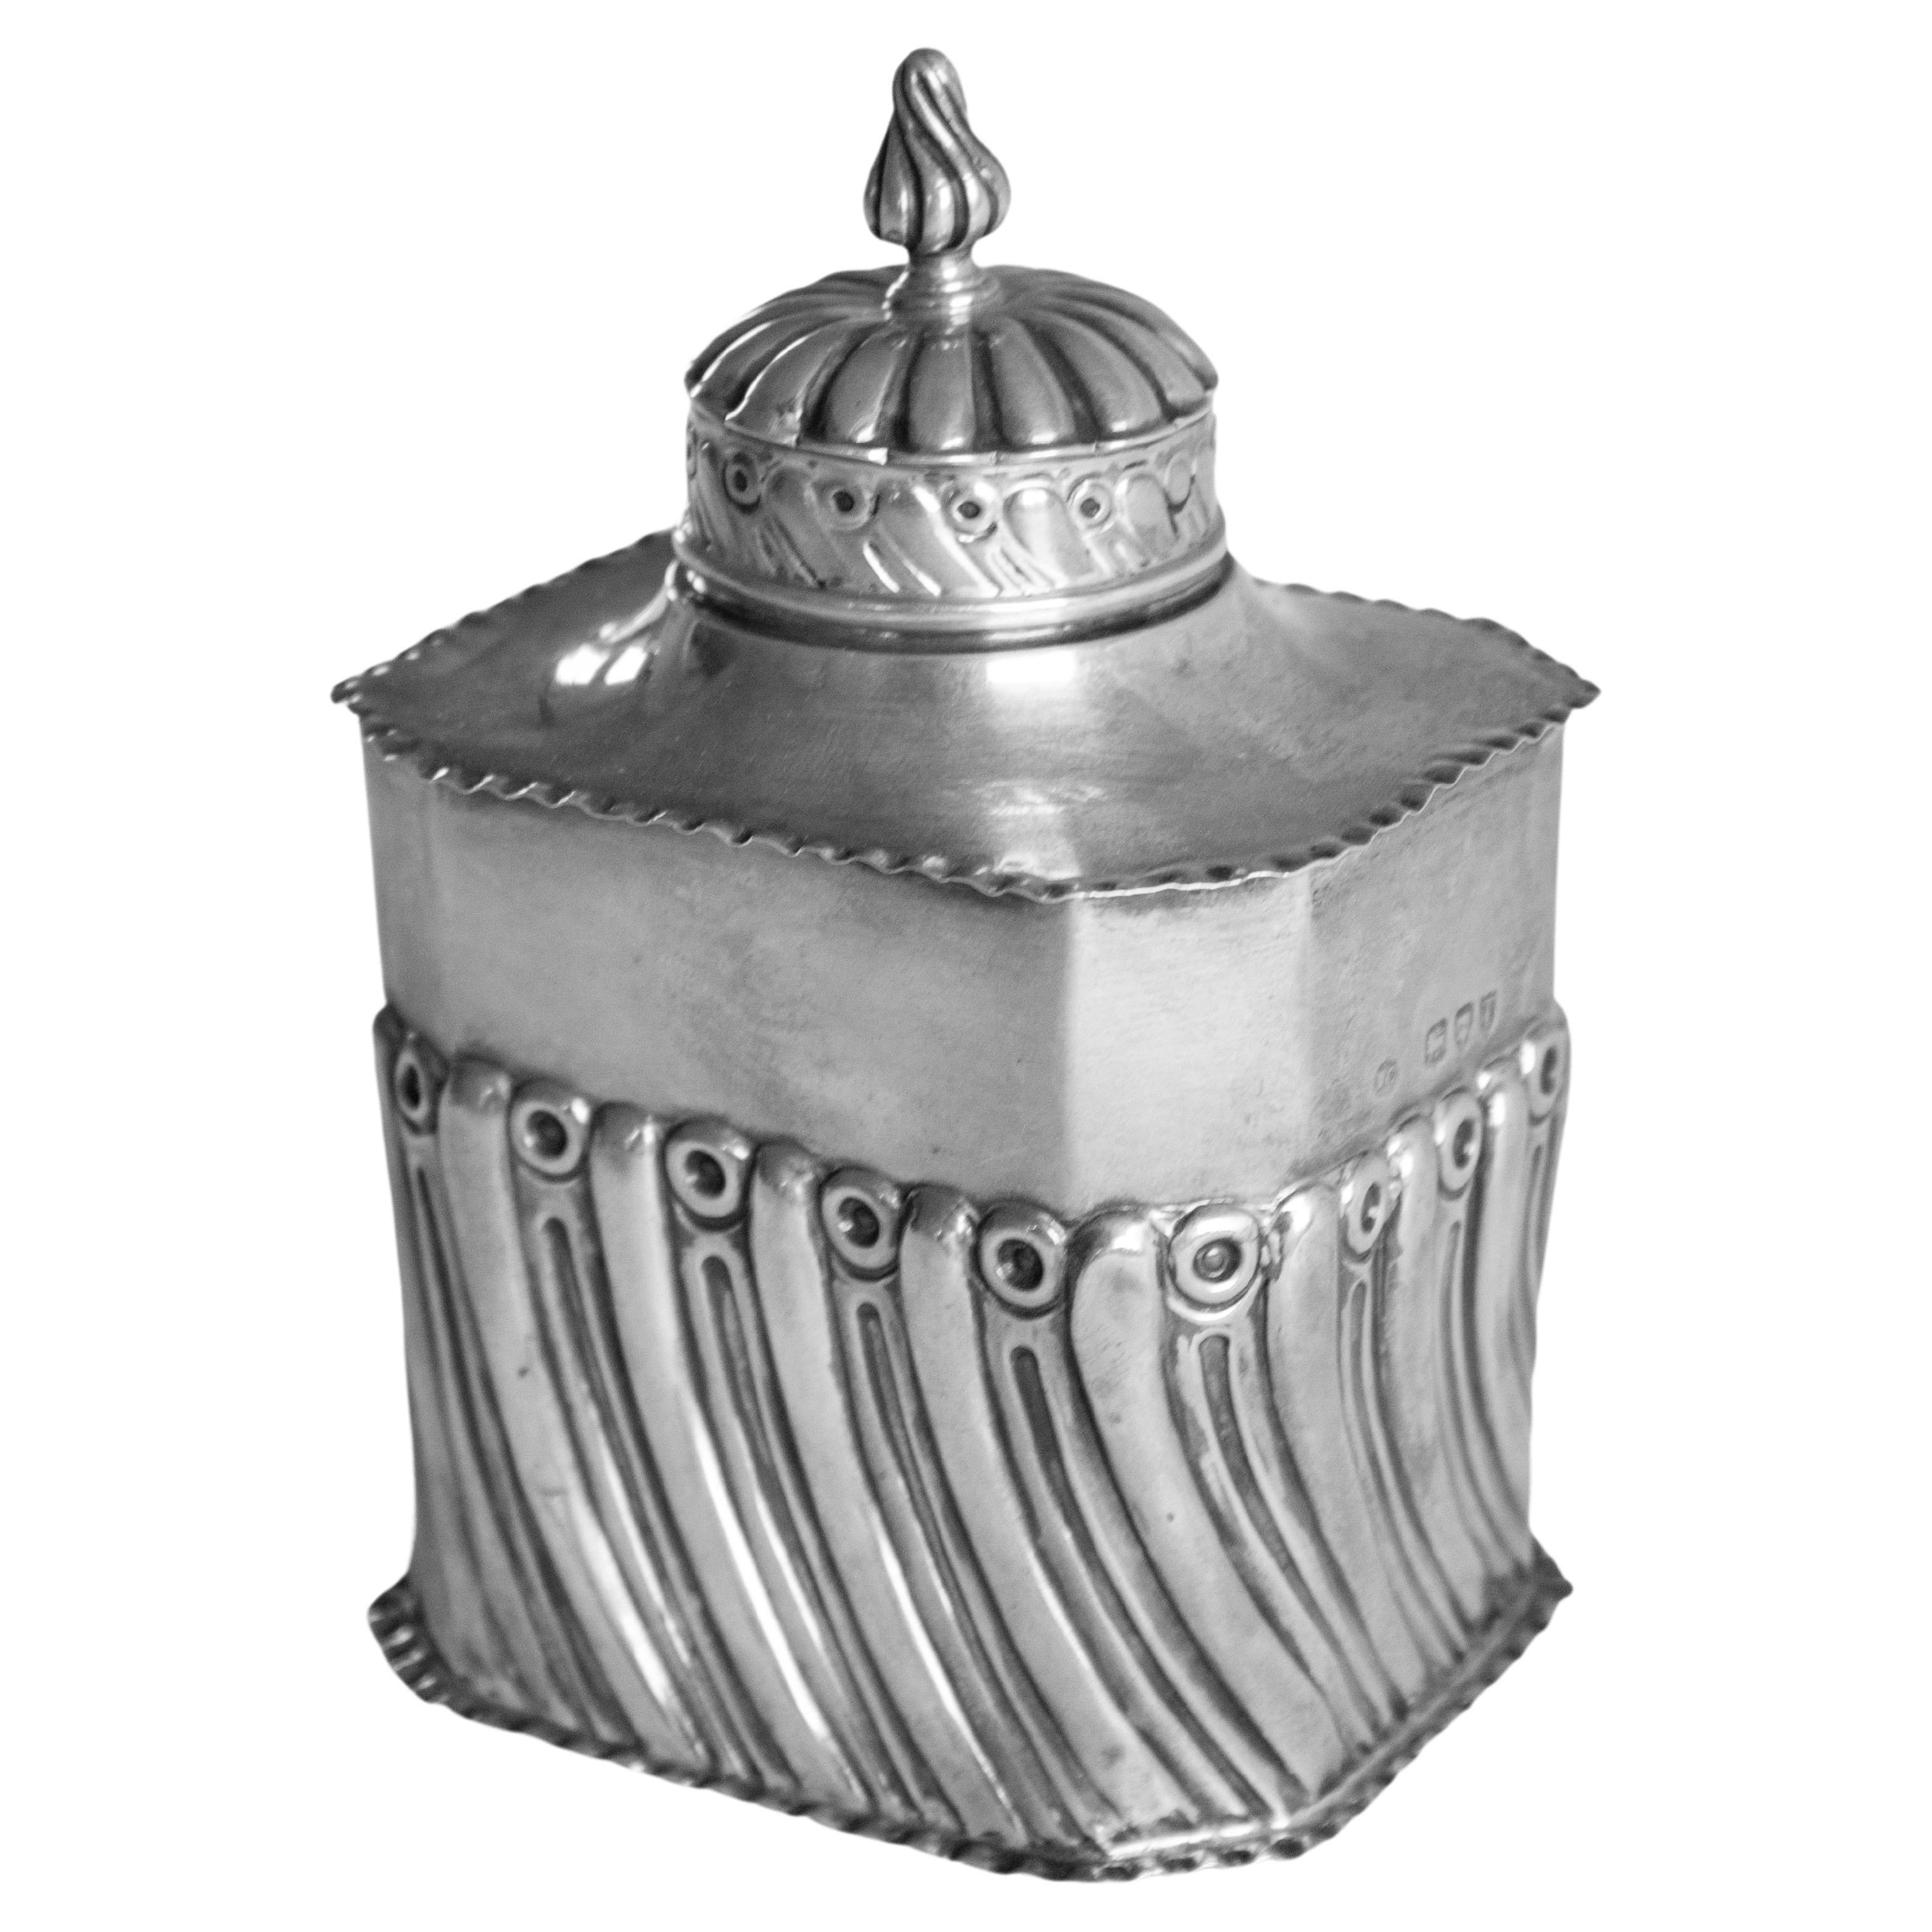 English Tea Caddy in Sterling Silver, dated 1894, William Richard Corke, London For Sale